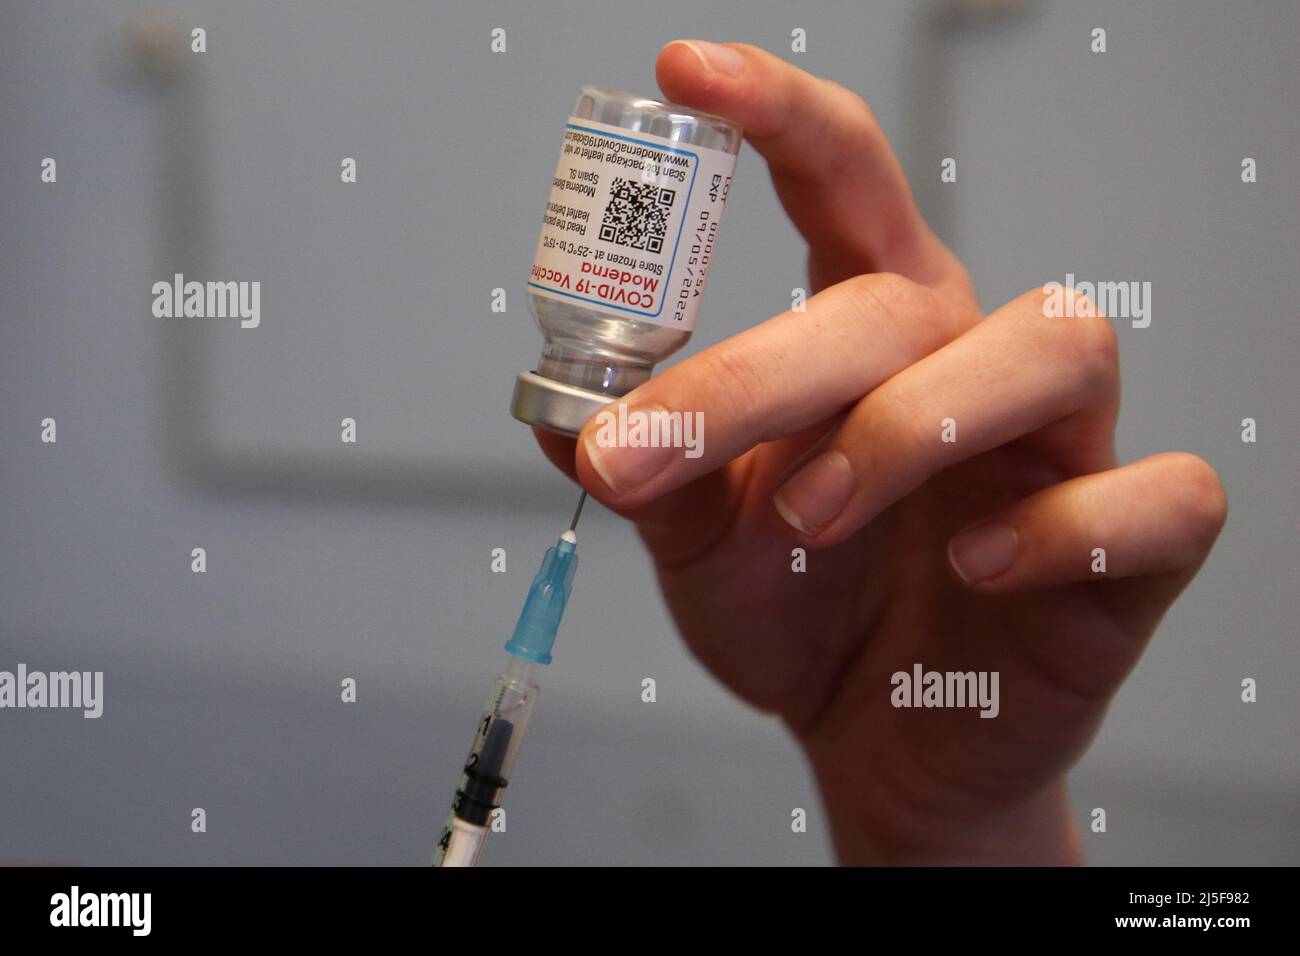 London, UK 22 Apr 2022 - A vaccinator draws the Spikevax (Moderna) COVID-19 vaccine as she prepares to administer the spring booster jab to a person at a vaccination centre. Credit Dinendra Haria /Alamy Live News Stock Photo